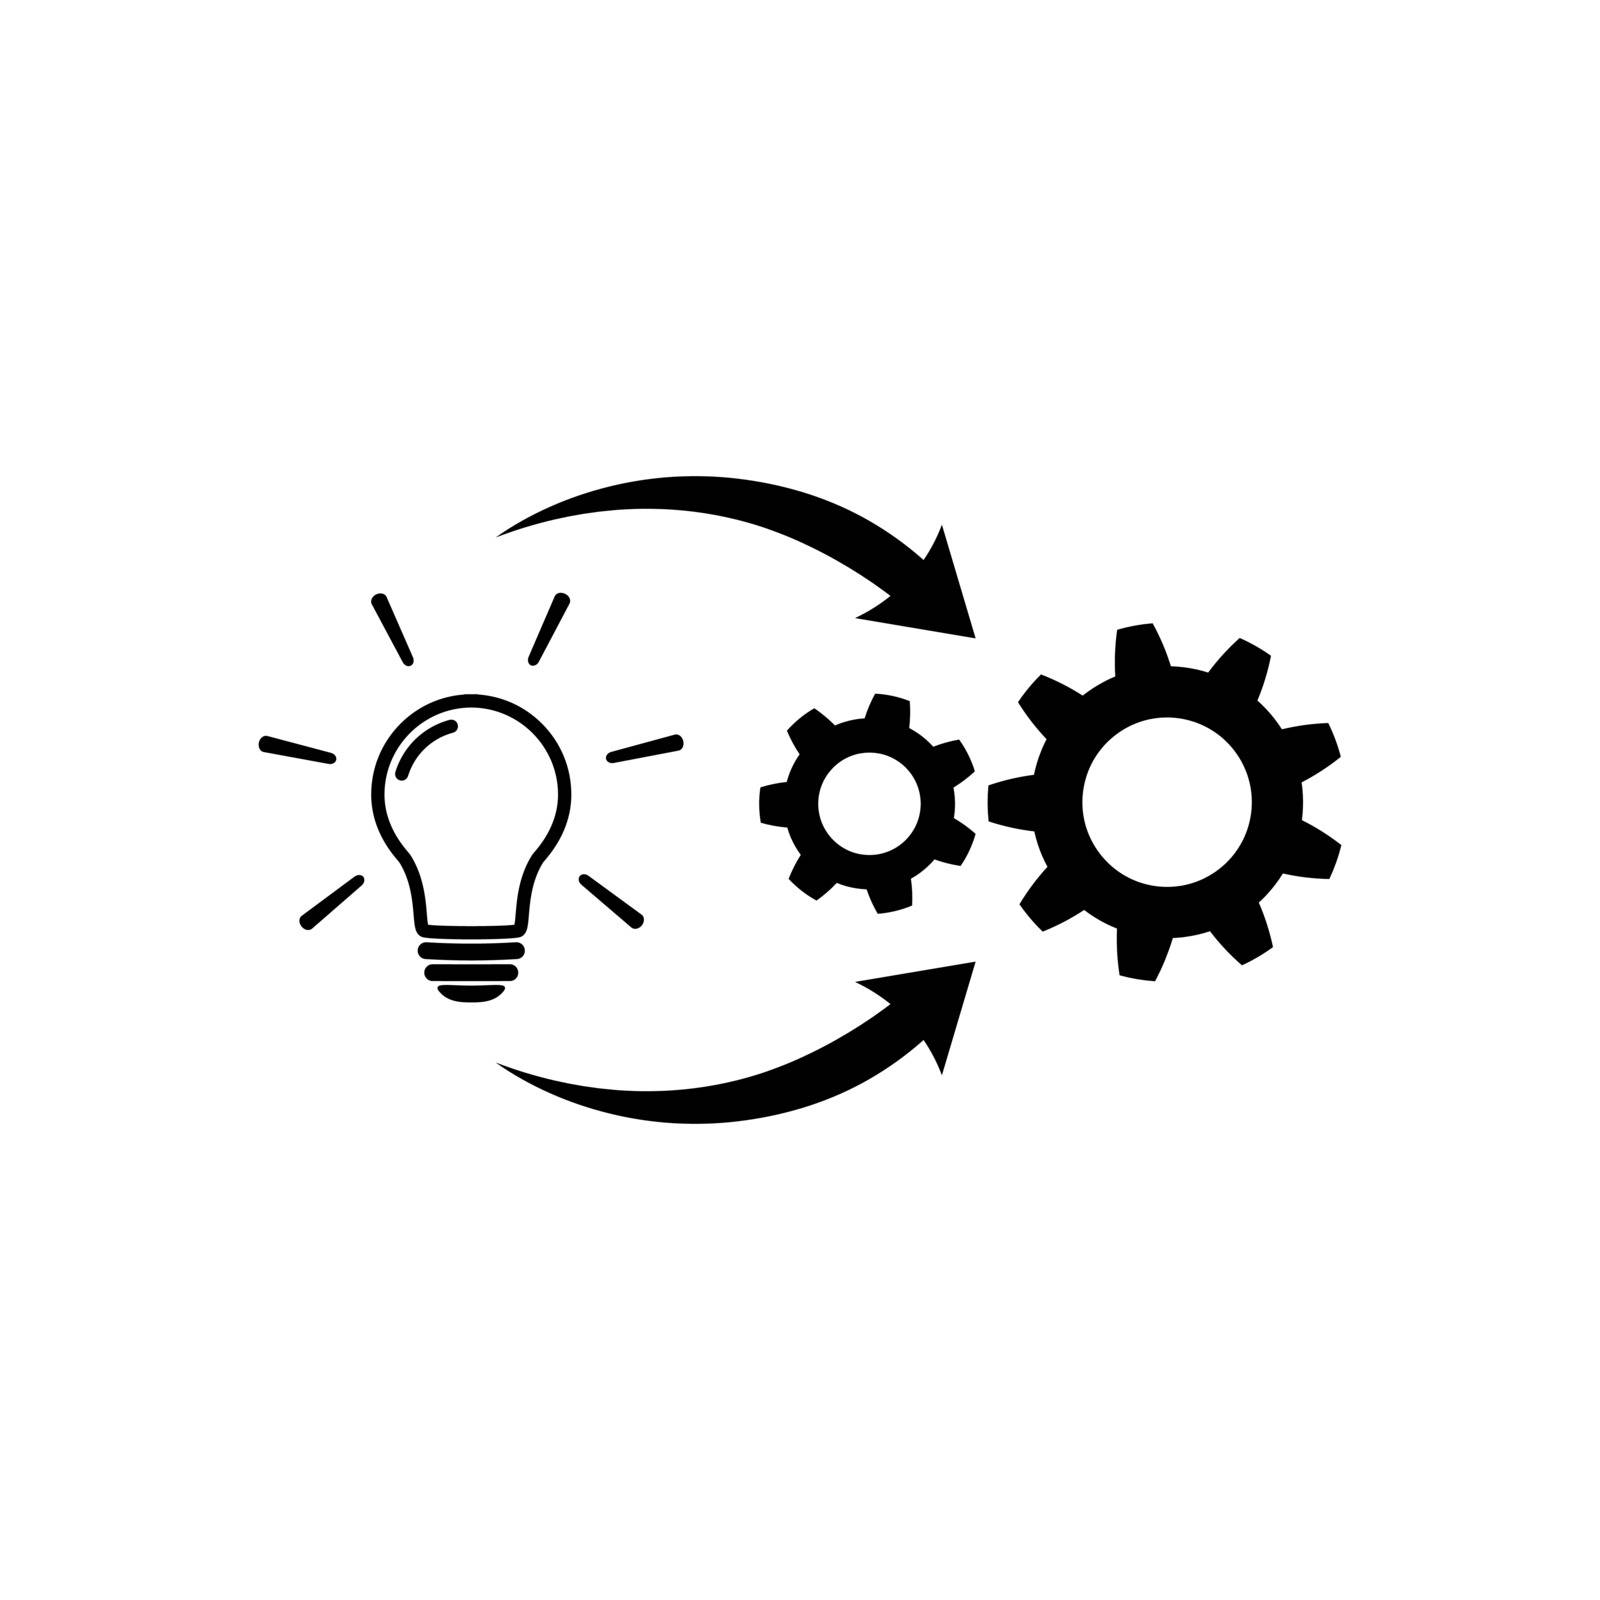 Implementation icon. Creative cycle symbol by veronawinner